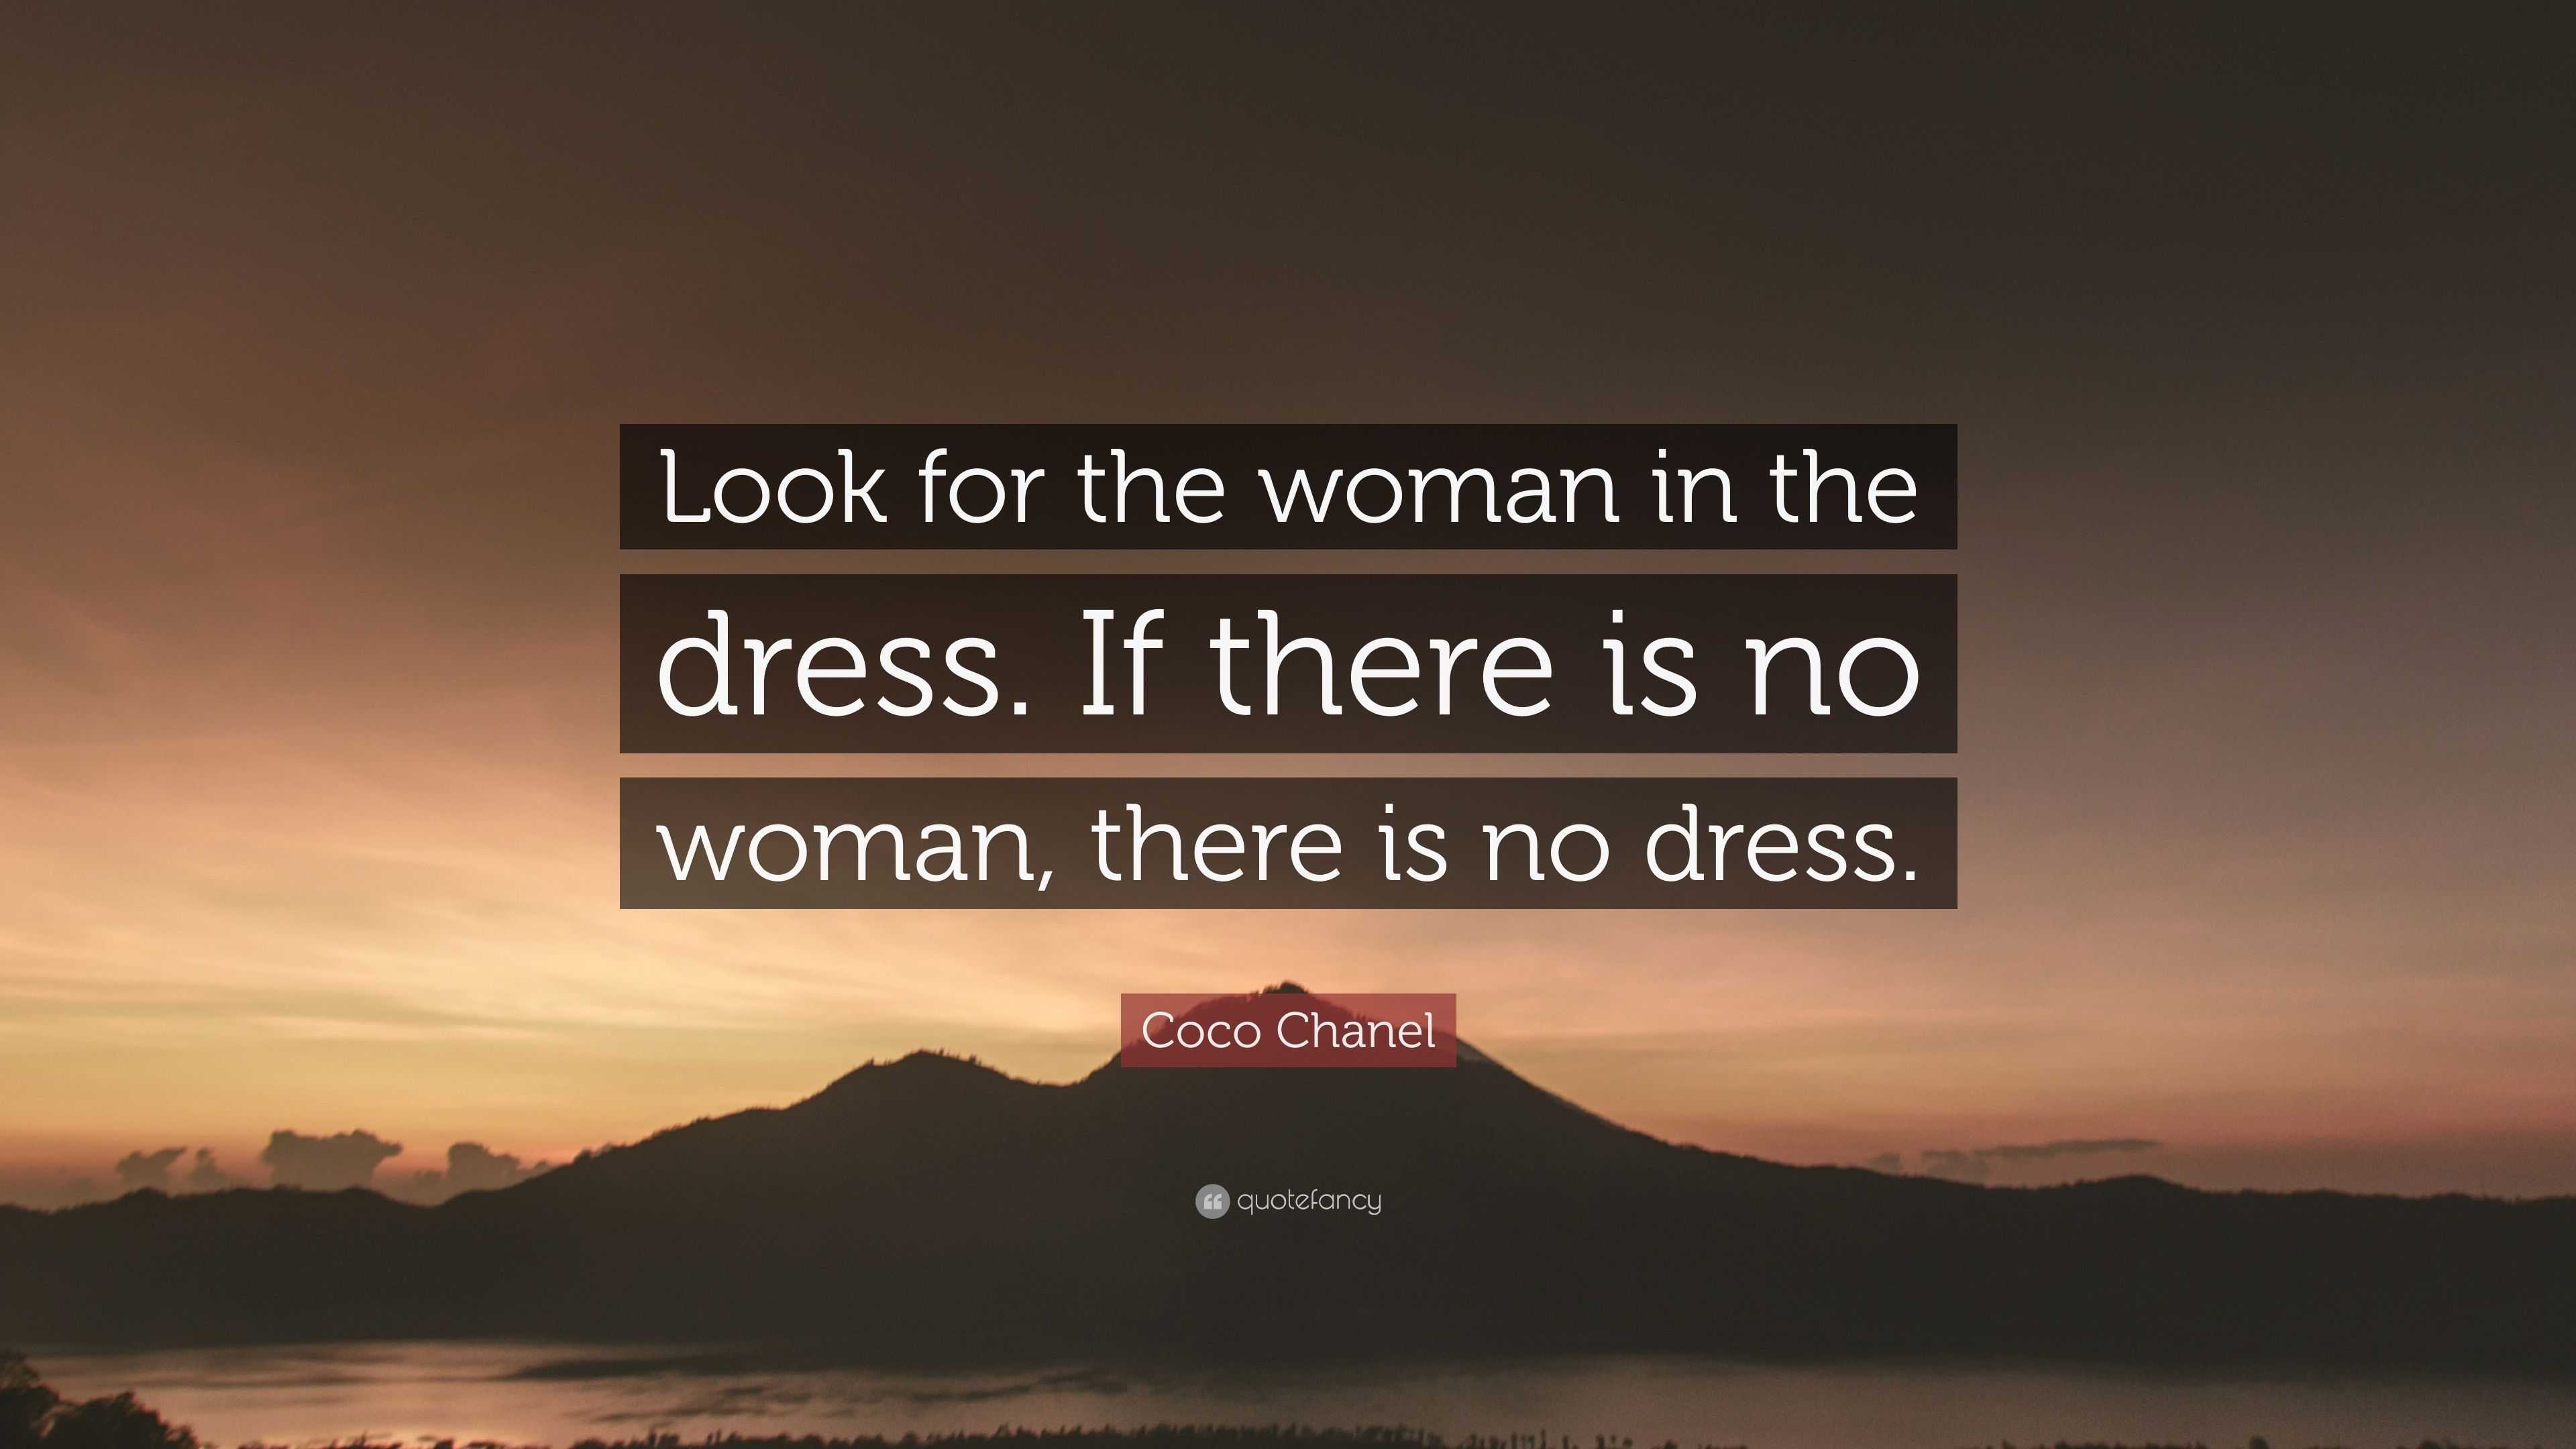 Coco Chanel Quote: “Look for the woman in the dress. If there is